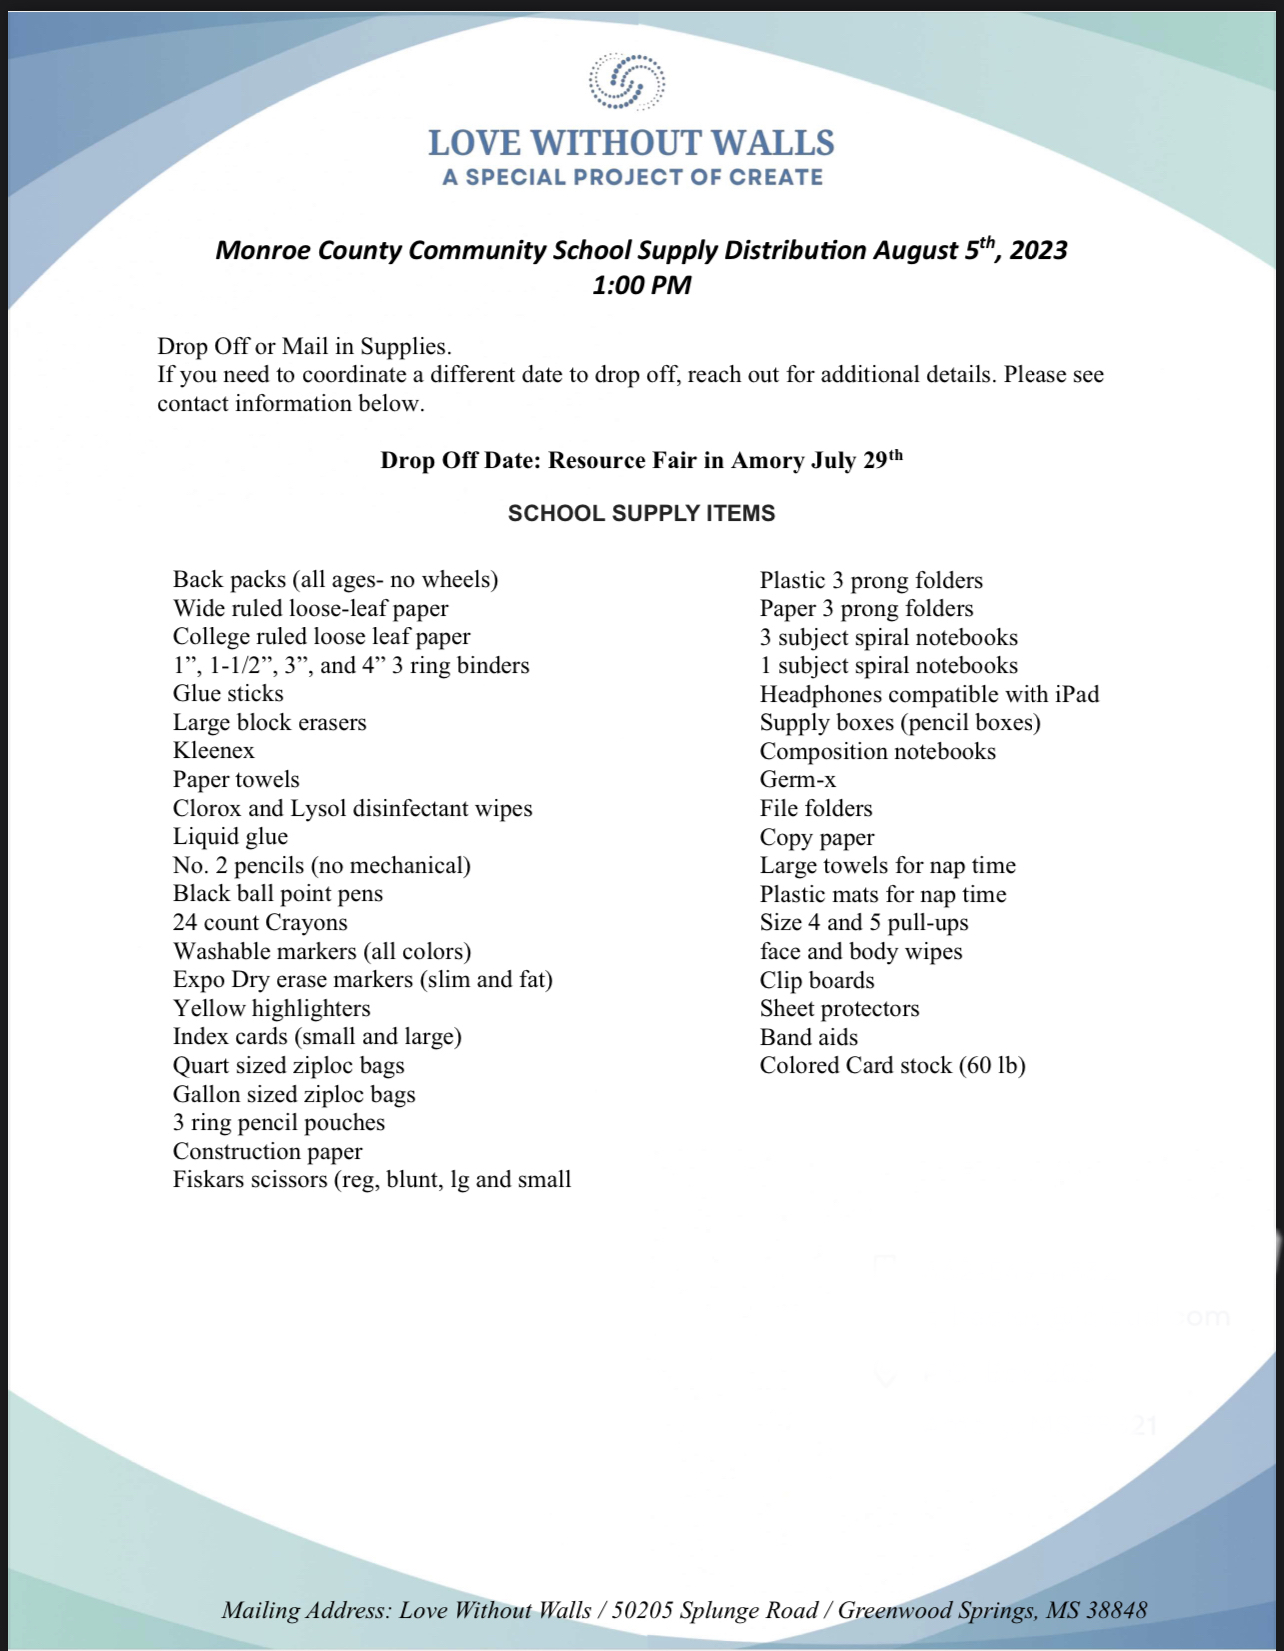 A list of school supplies needed in Monroe County for families impacted by recent storms.